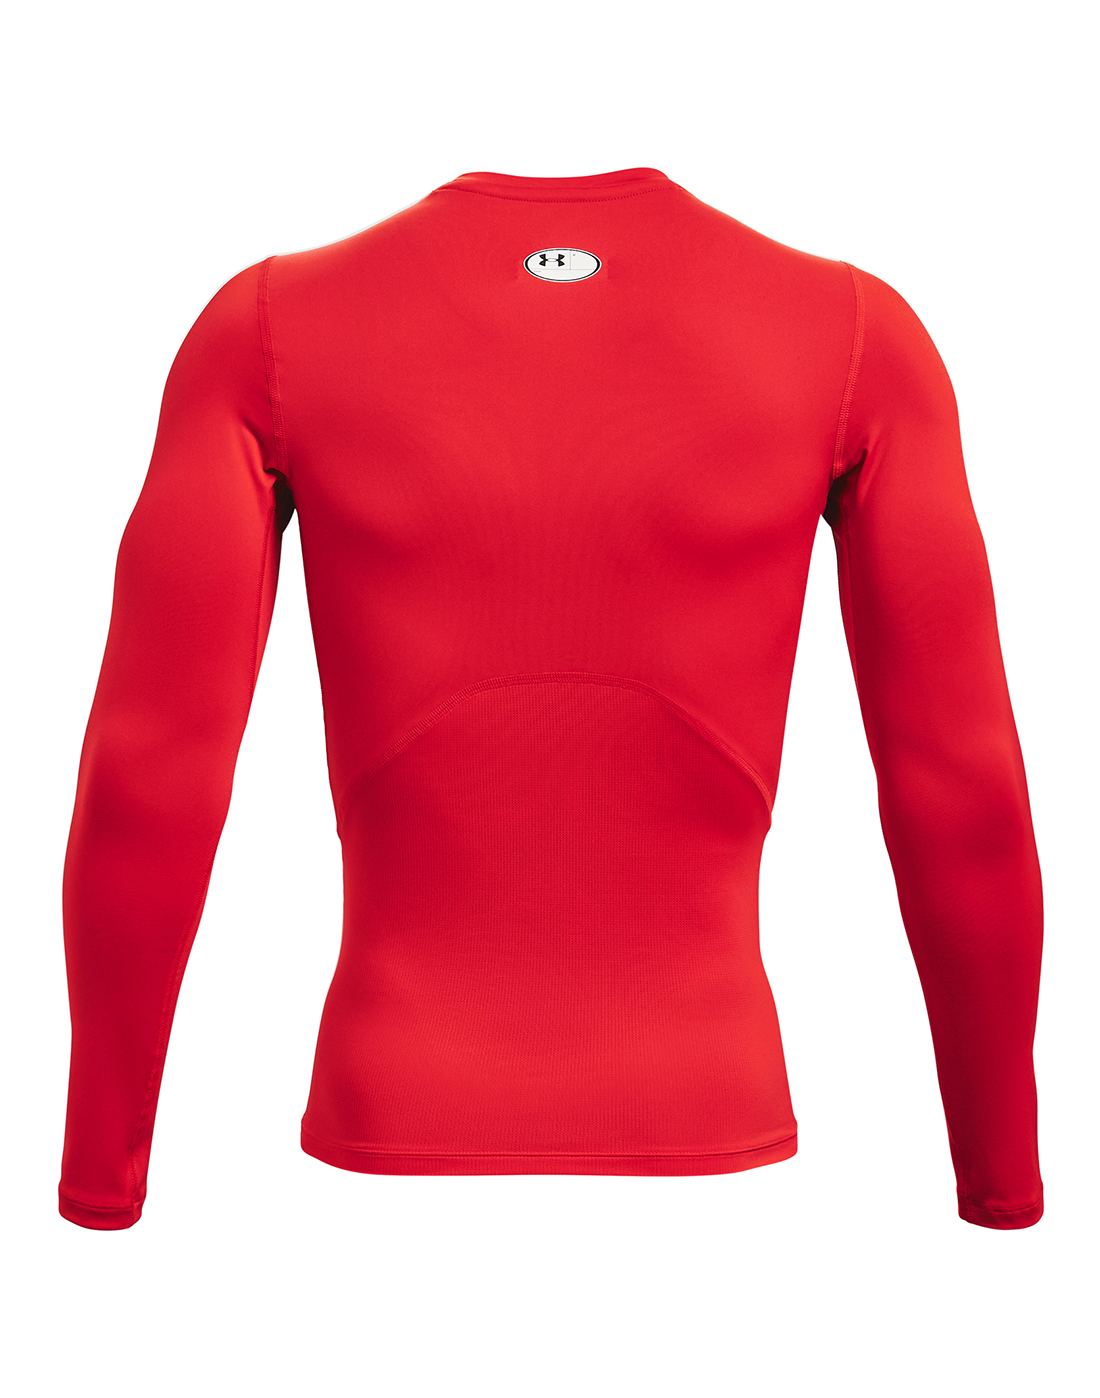 Under Armour Adults Heatgear Armour Compression Long Sleeve Top - Red